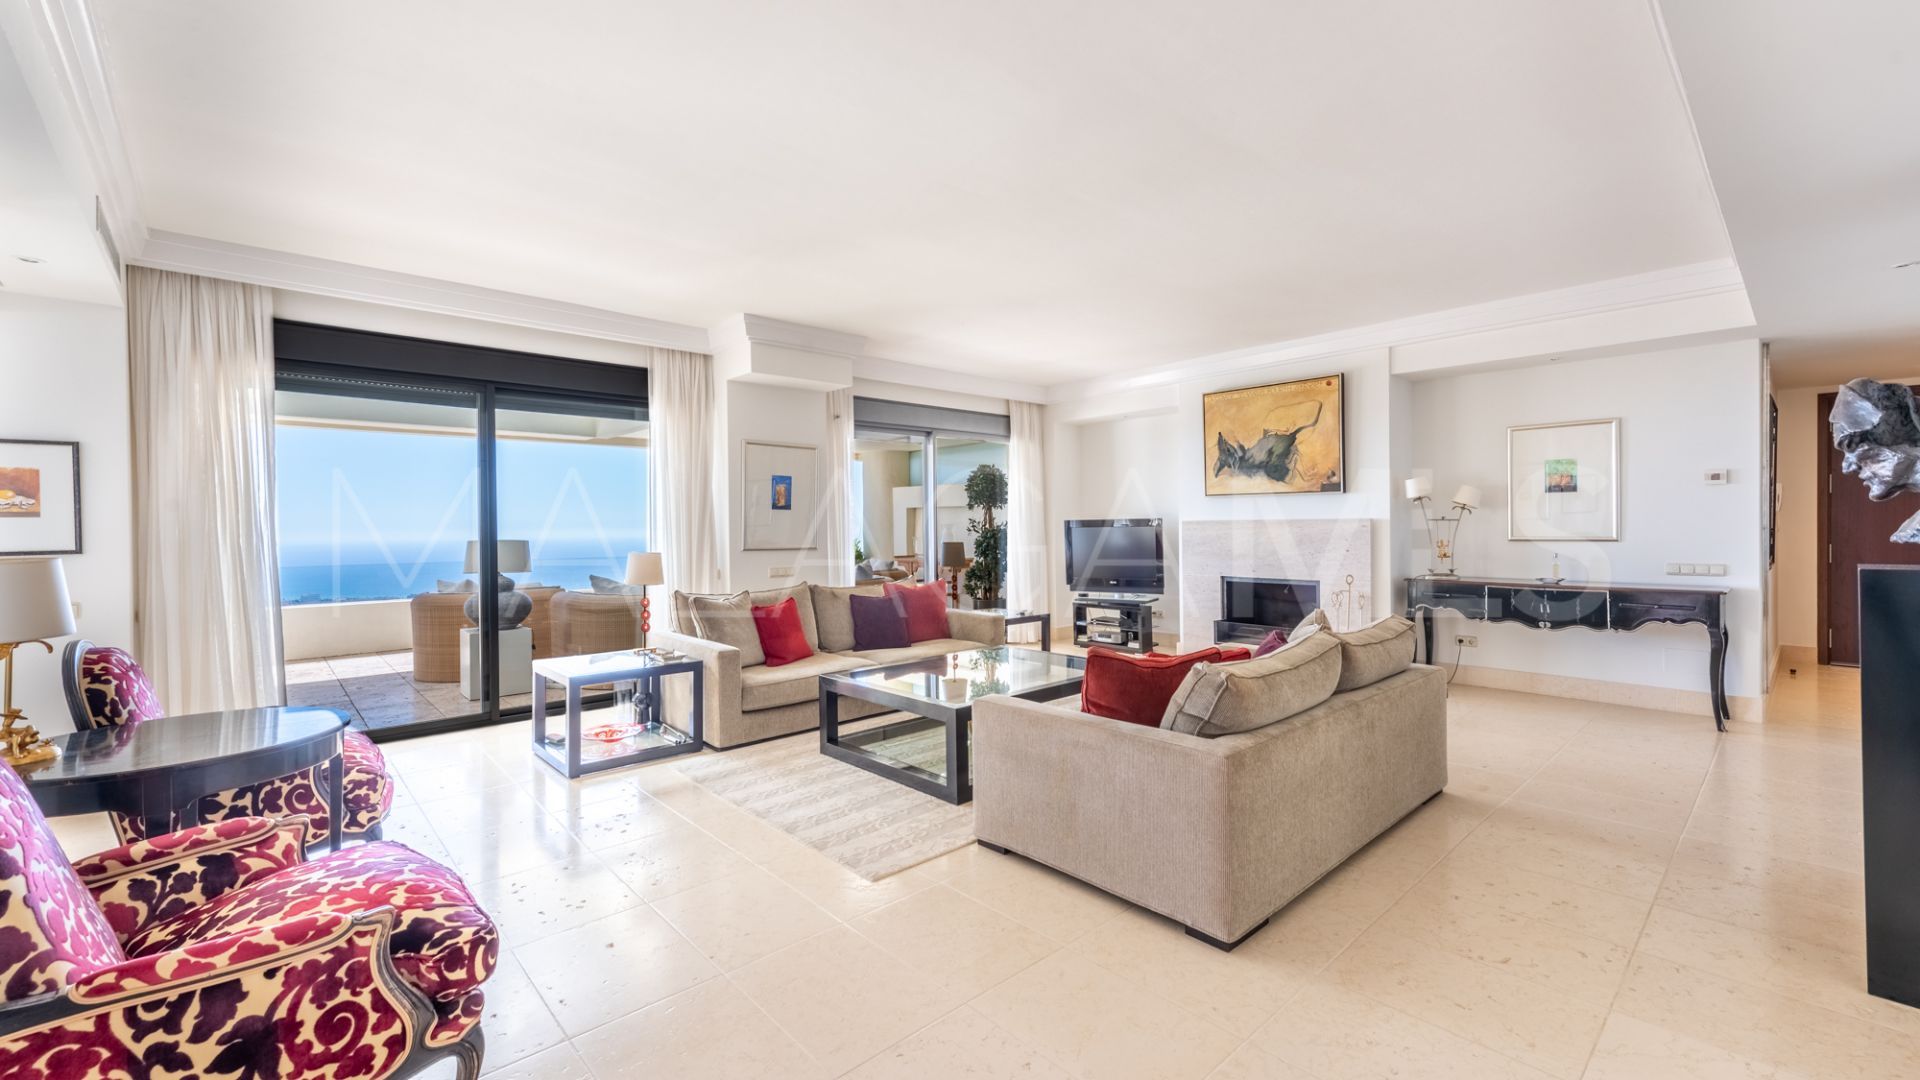 Doppelhaus for sale in Los Monteros Hill Club